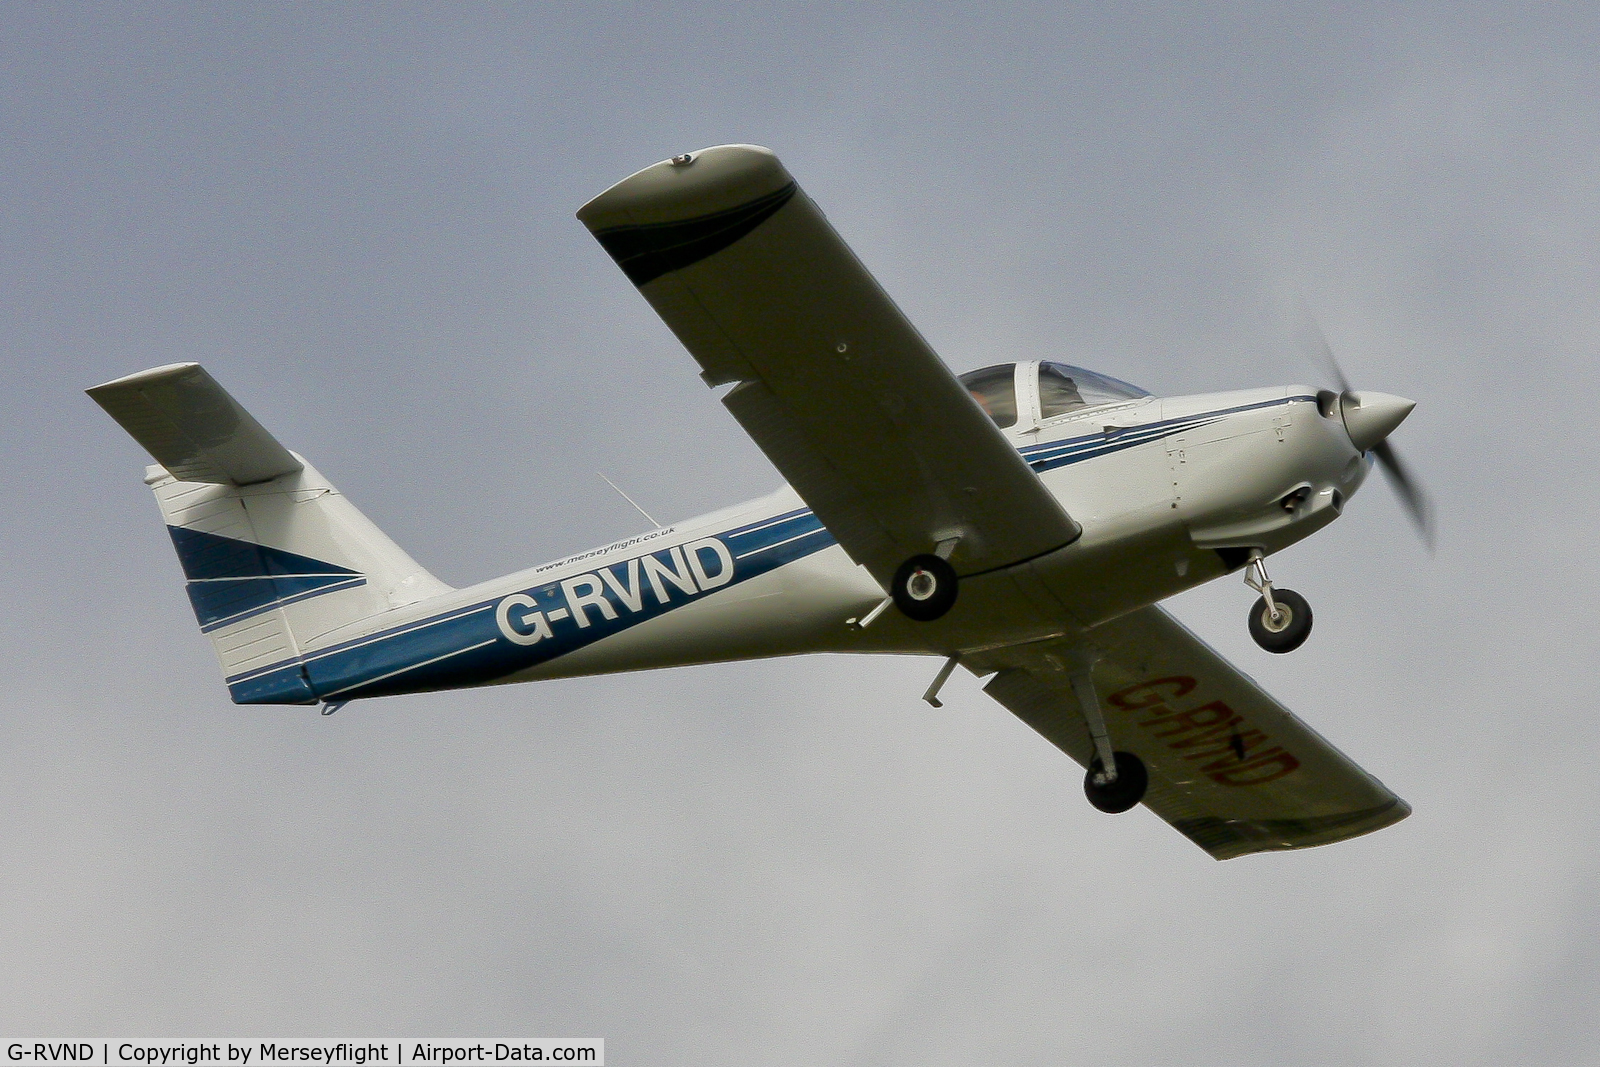 G-RVND, 1979 Piper PA-38-112 Tomahawk Tomahawk C/N 38-79A0545, G RVND at Liverpool